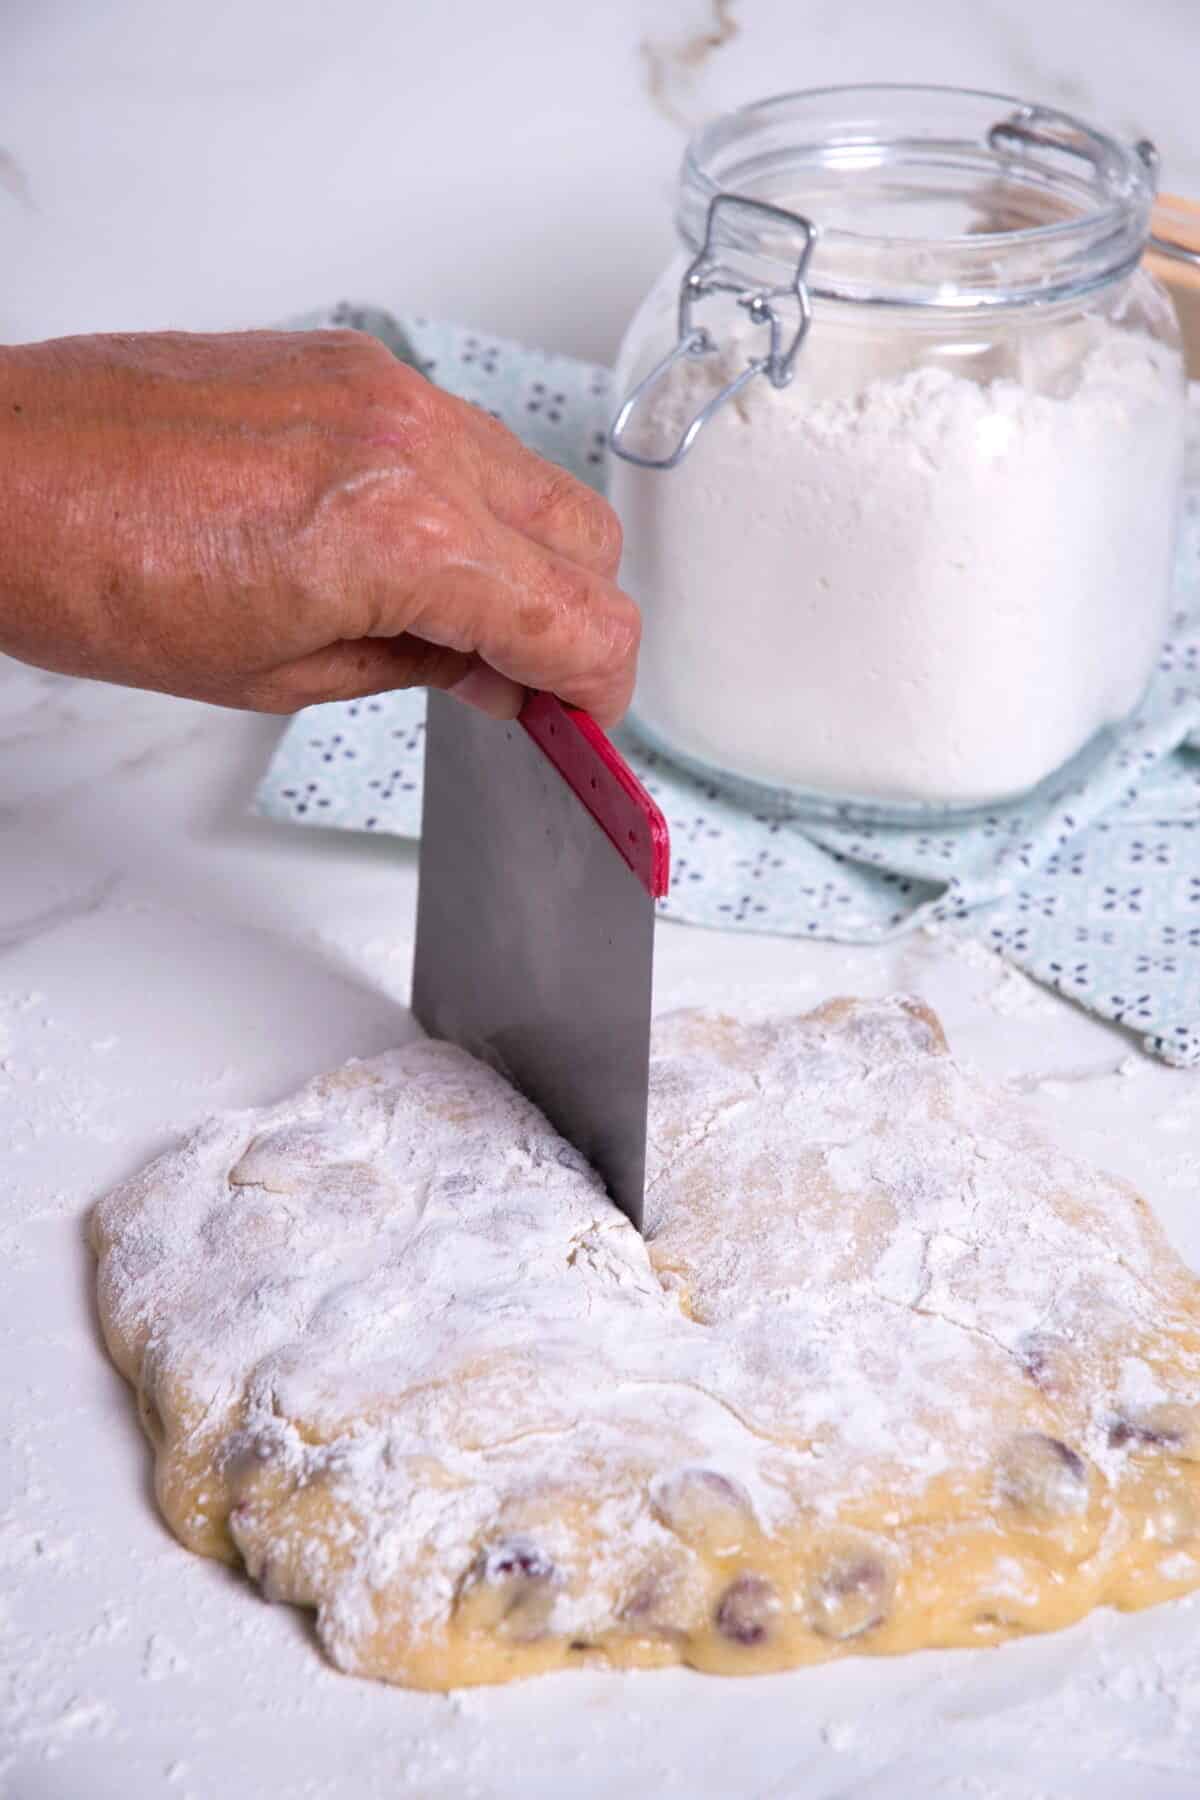 Cranberry biscotti dough on floured surface with scraper.